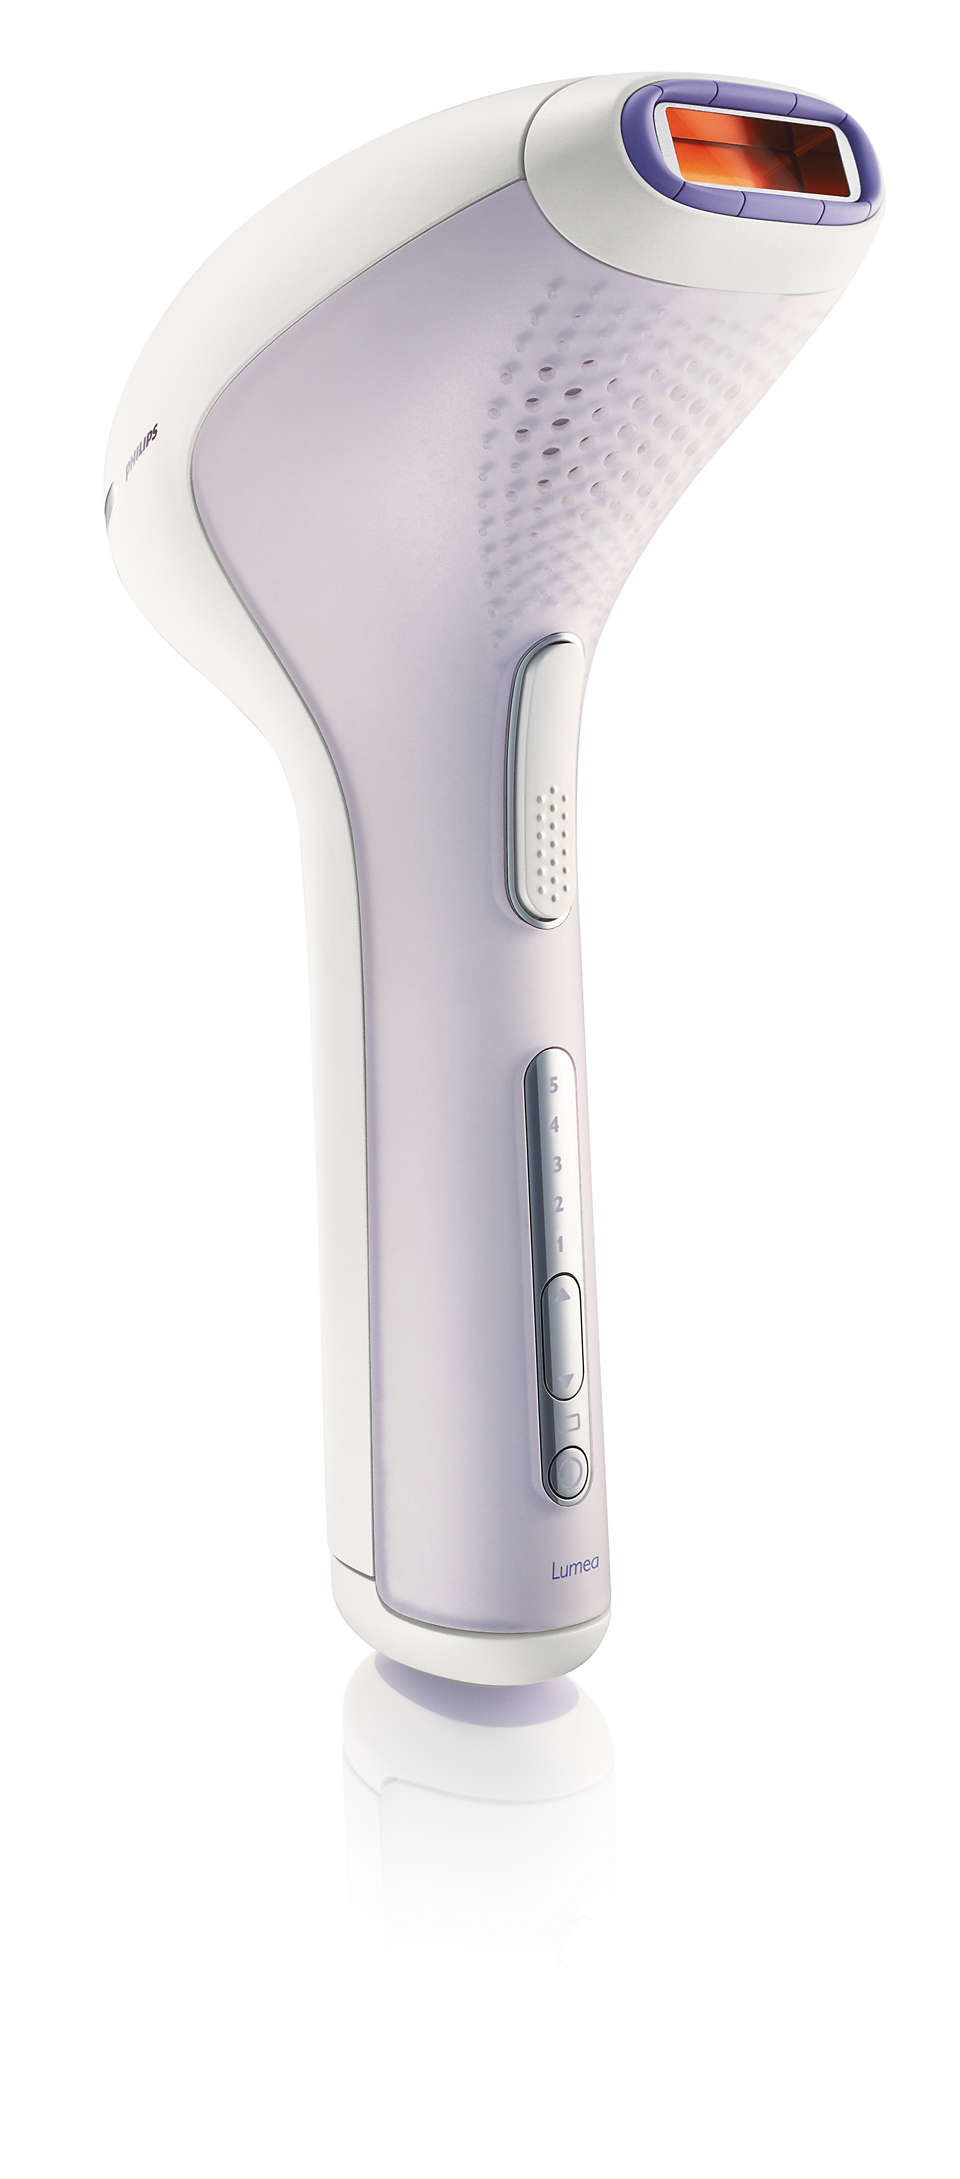 Lumea IPL hair removal system SC2001/01 | Philips